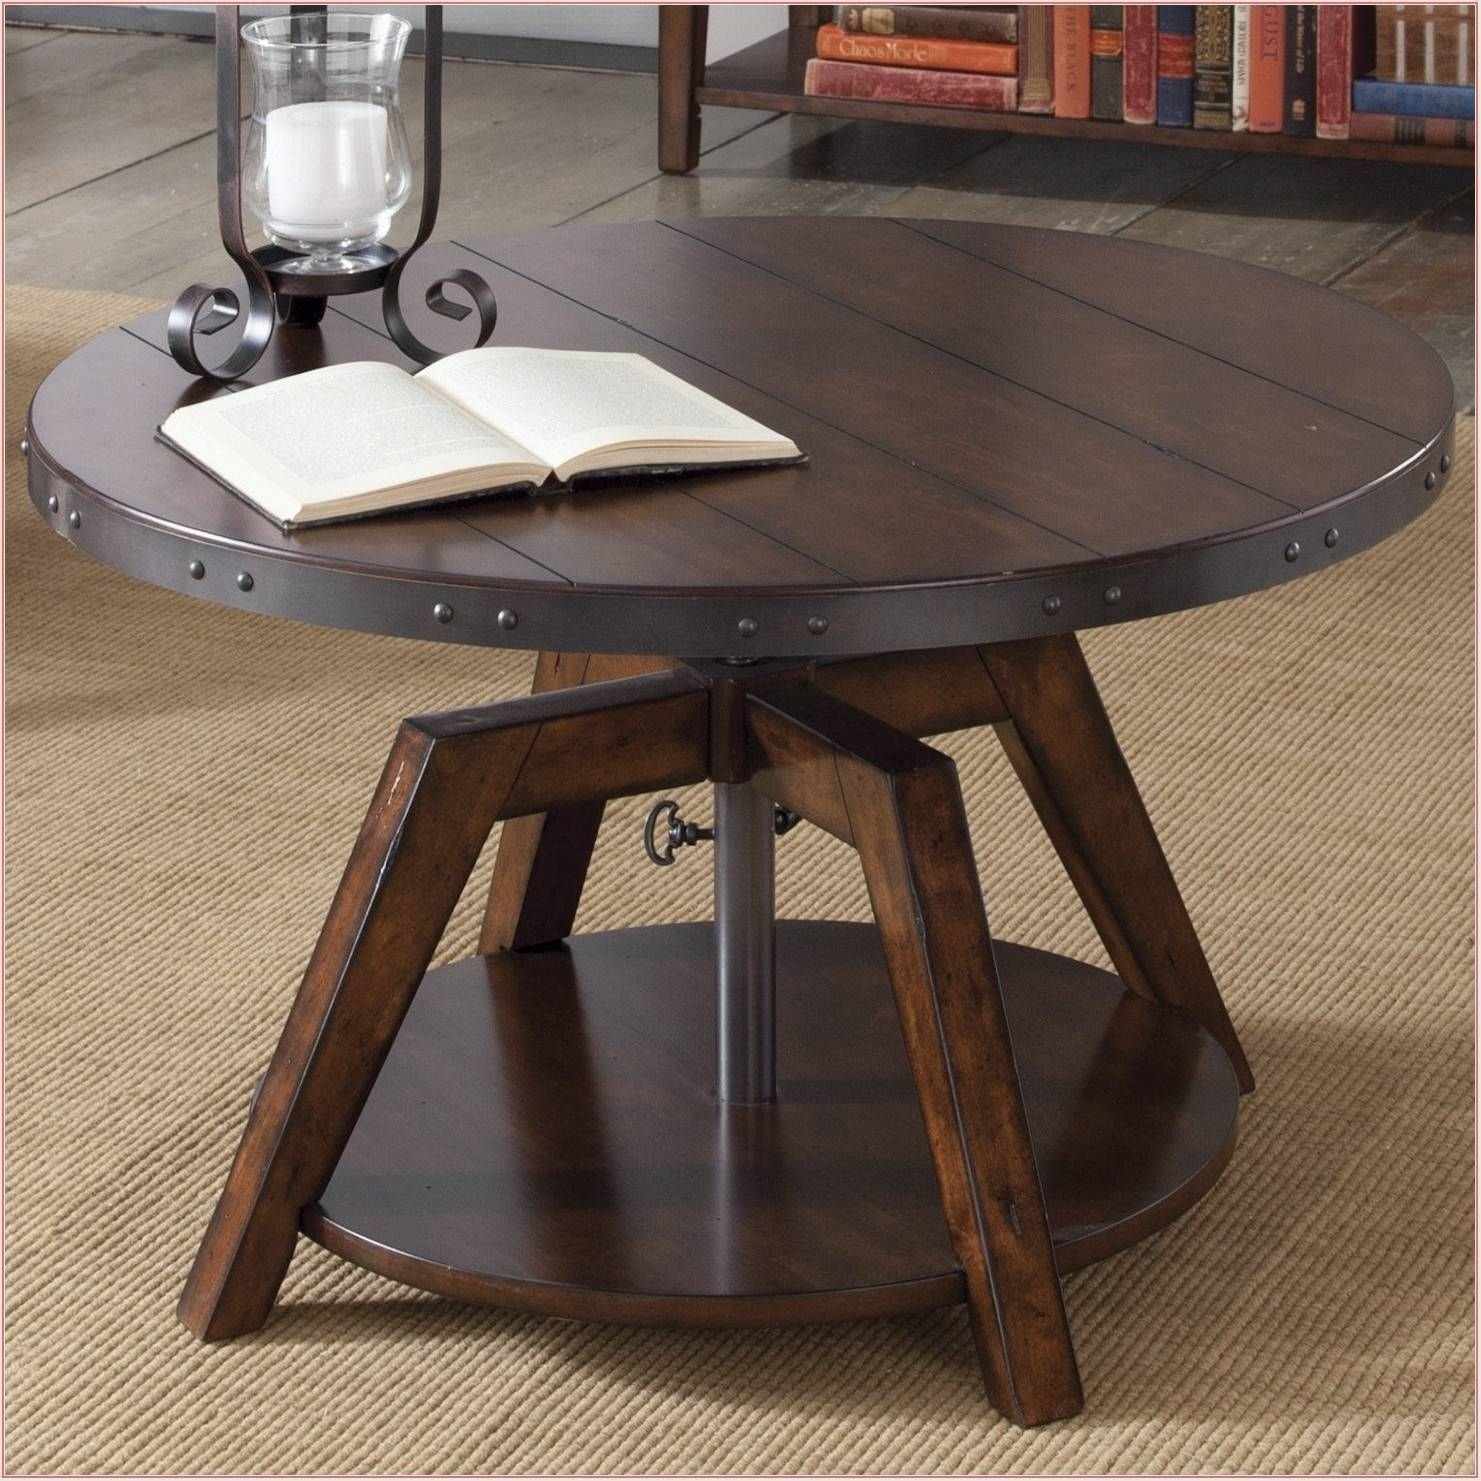 50 Amazing Convertible Coffee Table To Dining Table Up To 70 Off pertaining to size 1481 X 1481